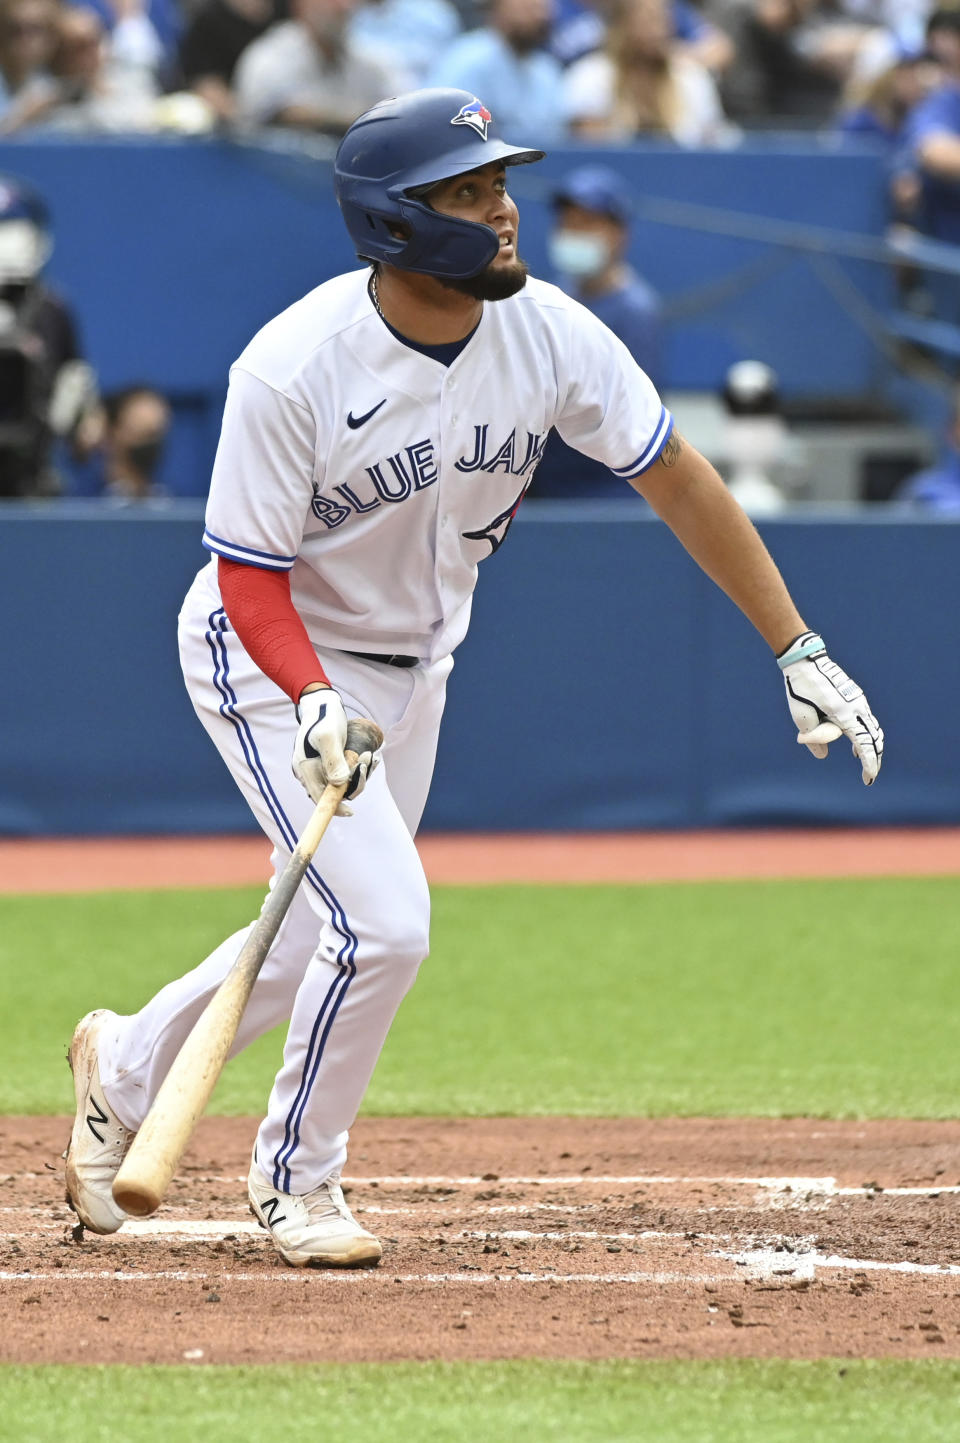 Toronto Blue Jays' Breyvic Valera watches his two-run home run in the fourth inning of a baseball game against the Oakland Athletics in Toronto on Saturday, Sept. 4, 2021. (Jon Blacker/The Canadian Press via AP)